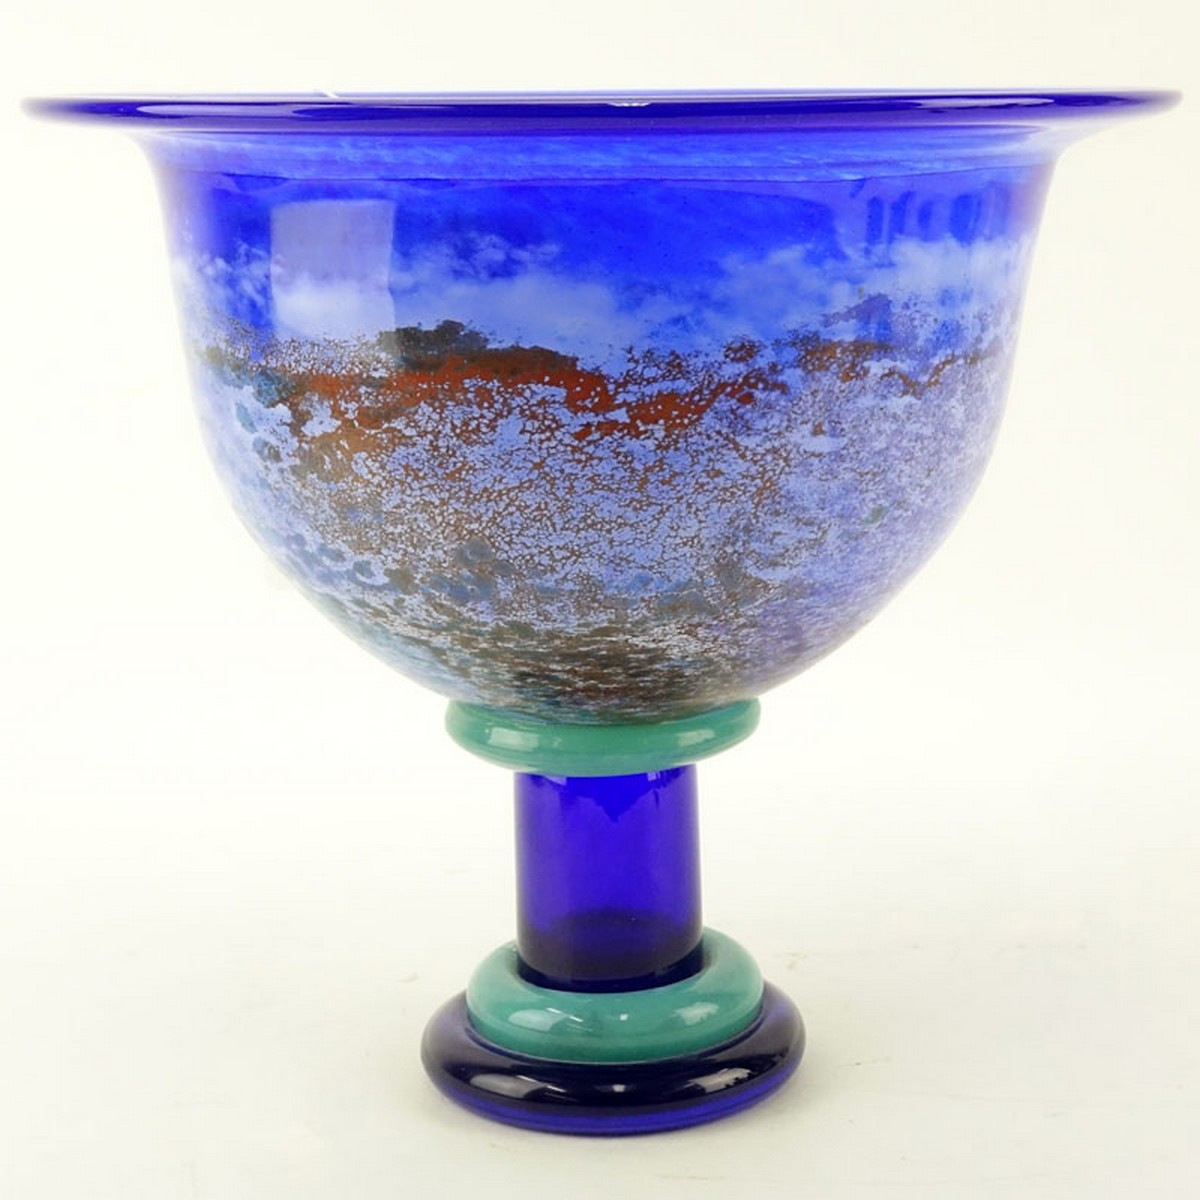 Large Kosta Boda Art Glass Compote by Kjell Engman. Signed and original sticker label attached.